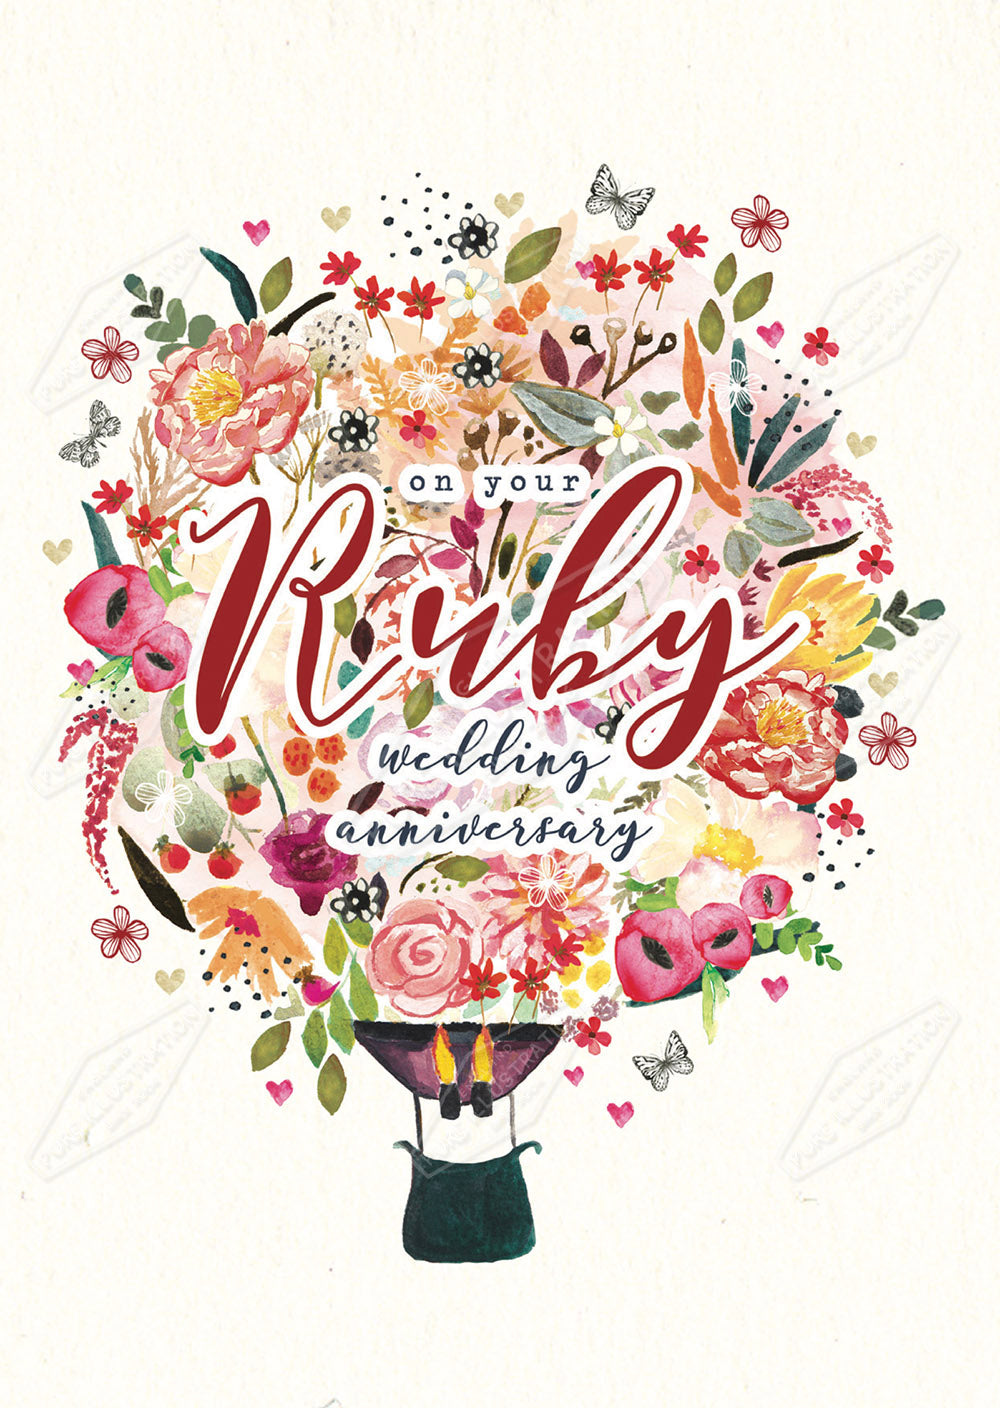 00034373EST- Emily Stalley is represented by Pure Art Licensing Agency - Anniversary Greeting Card Design